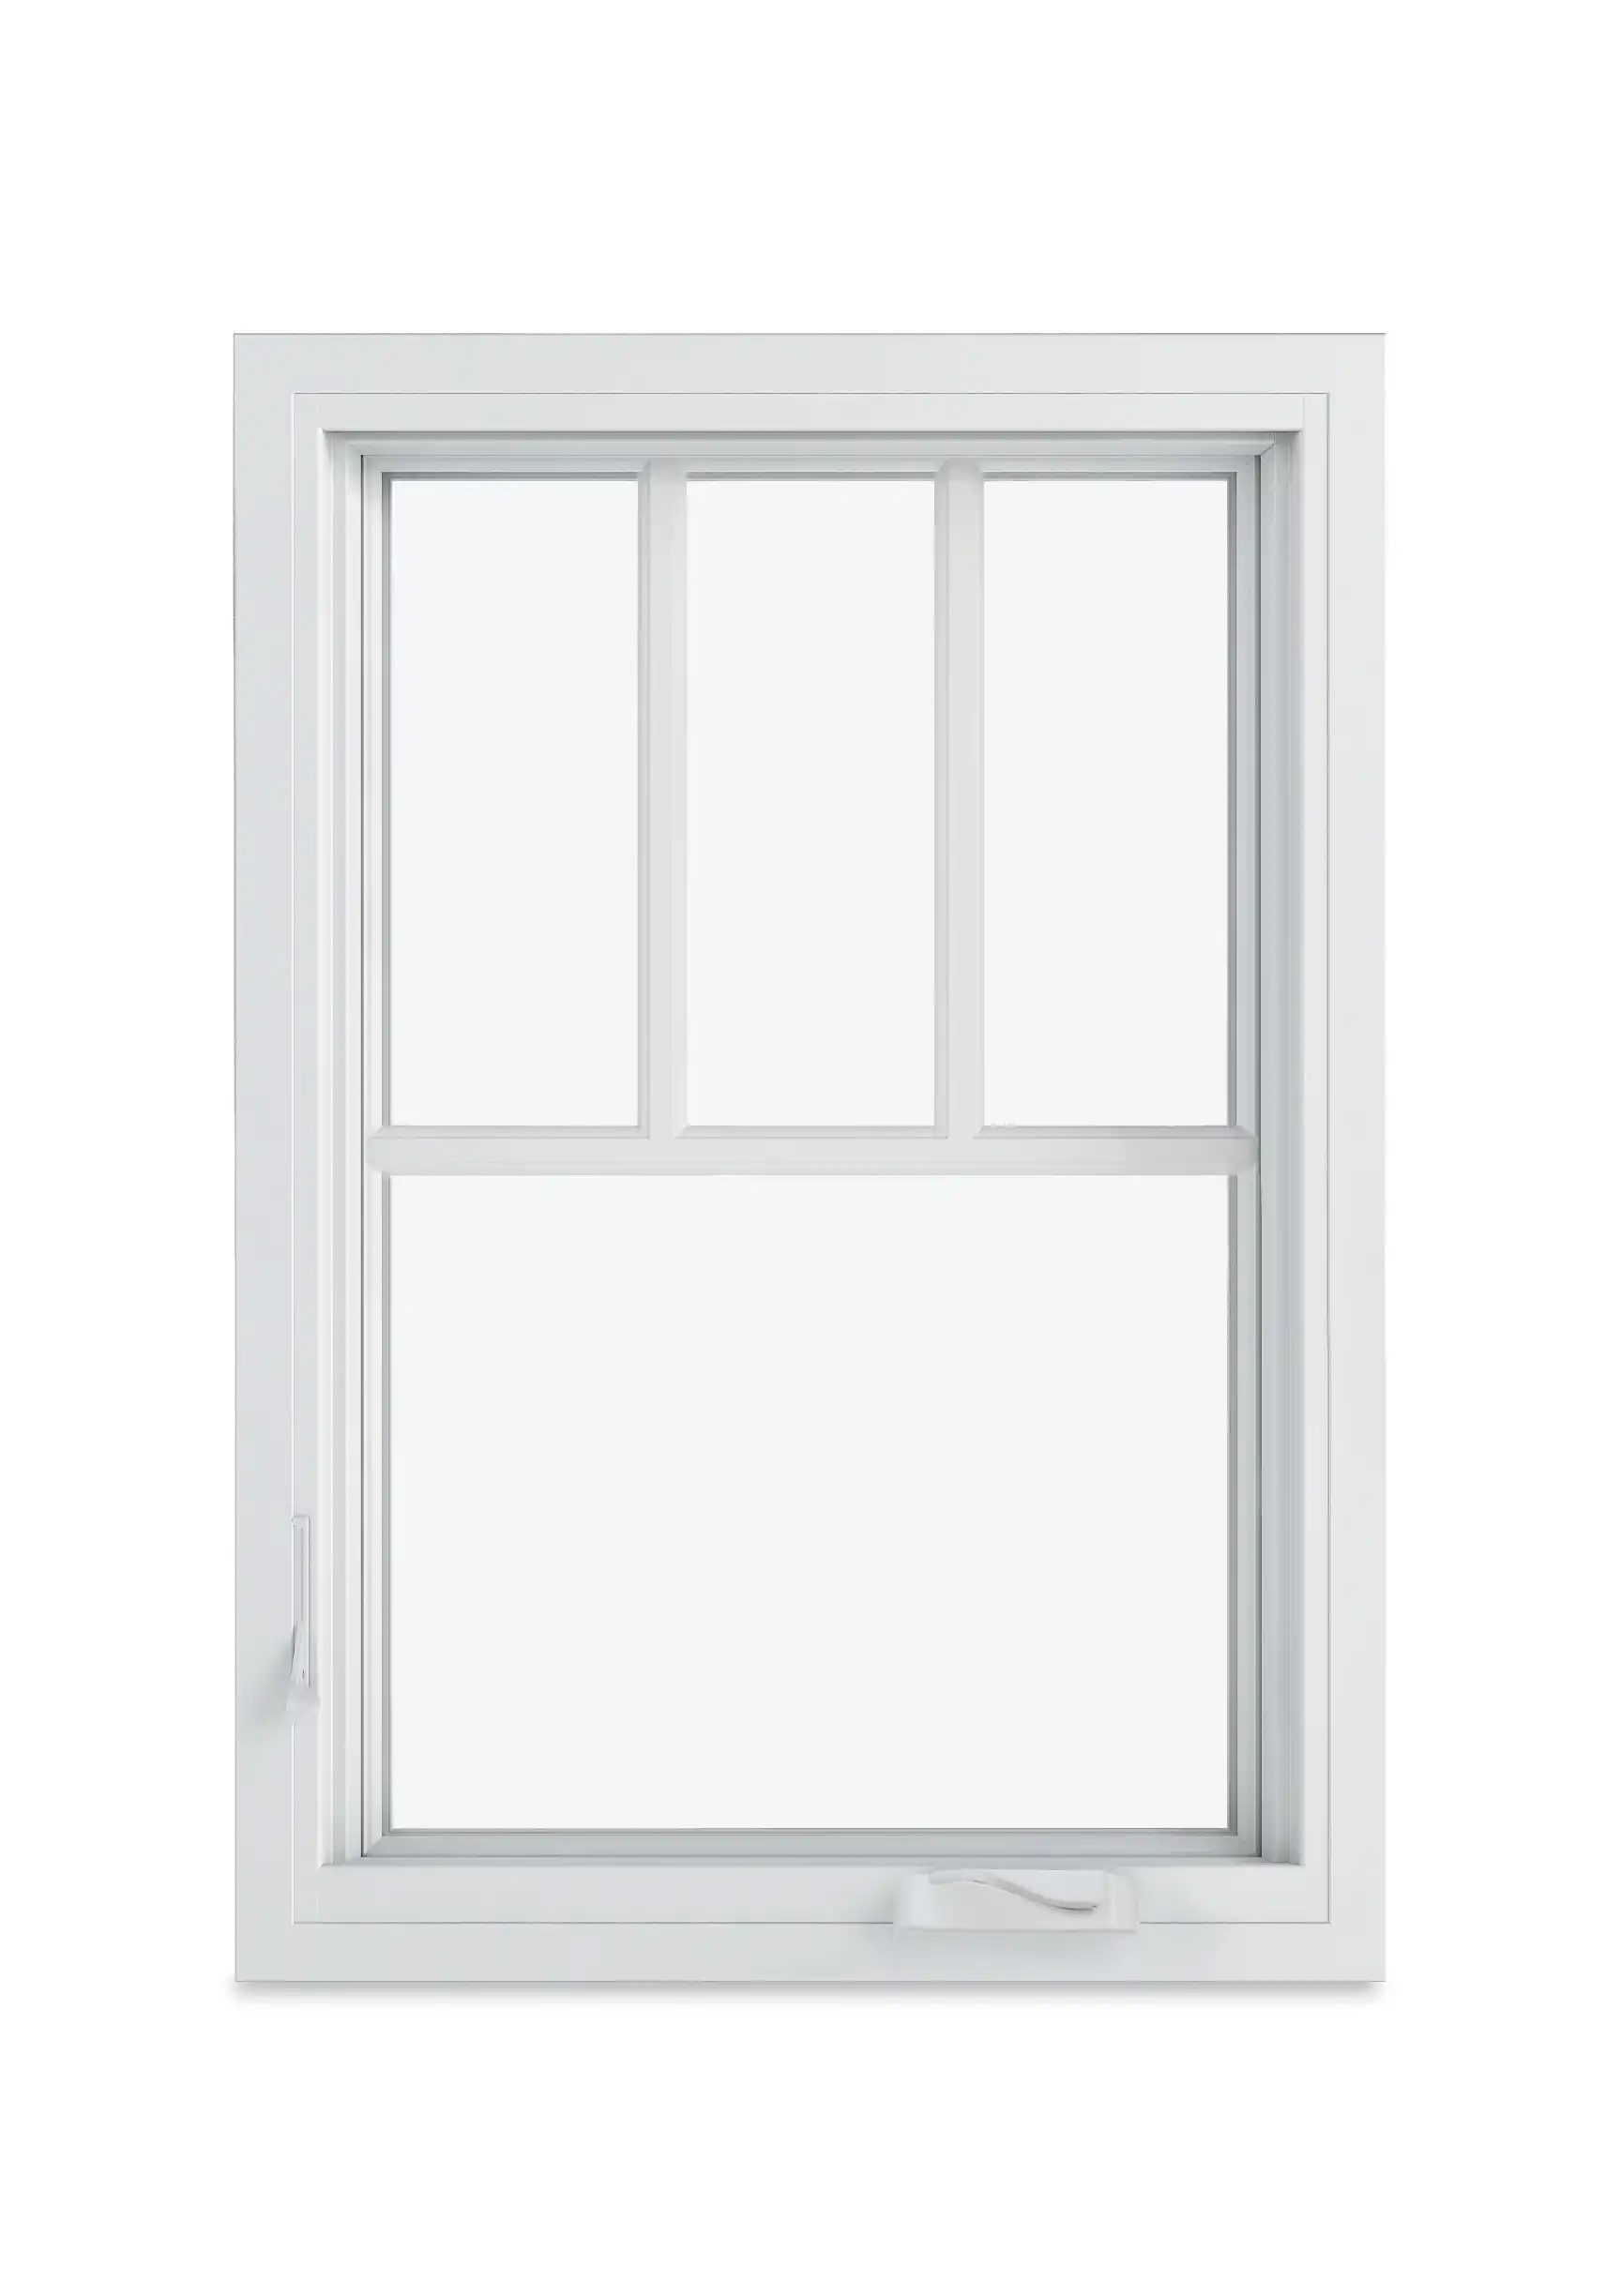 Image of a white Marvin Replacement Casement window with Cottage style divided lites.